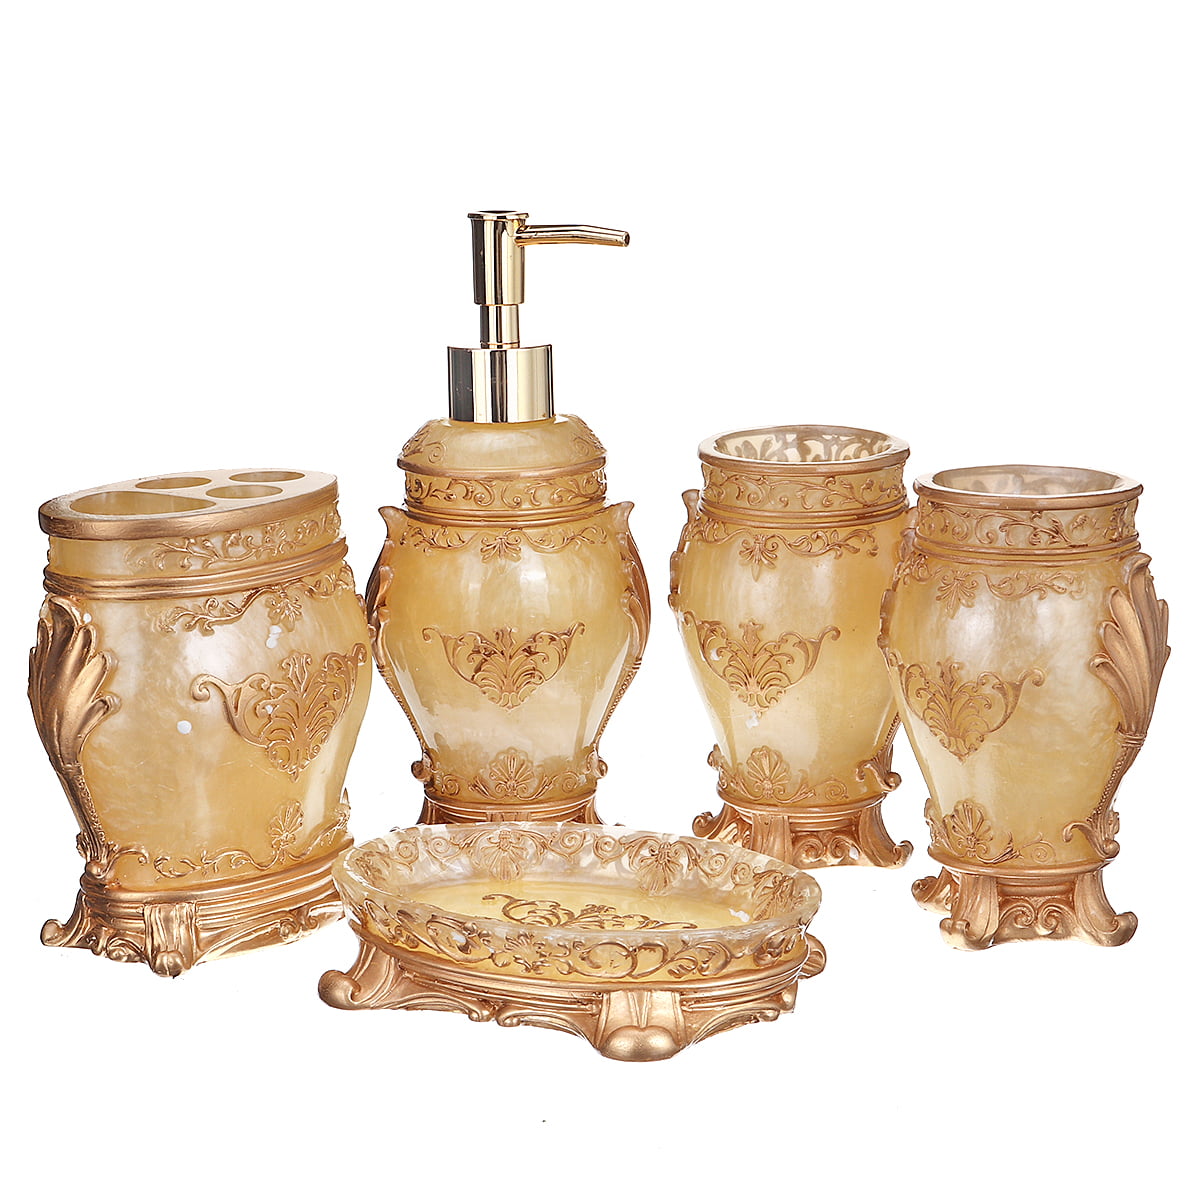 5 Piece Gold Bath Accessory Set Includes Liquid Soap Or Lotion Dispenser Wtoothbrush Holder 